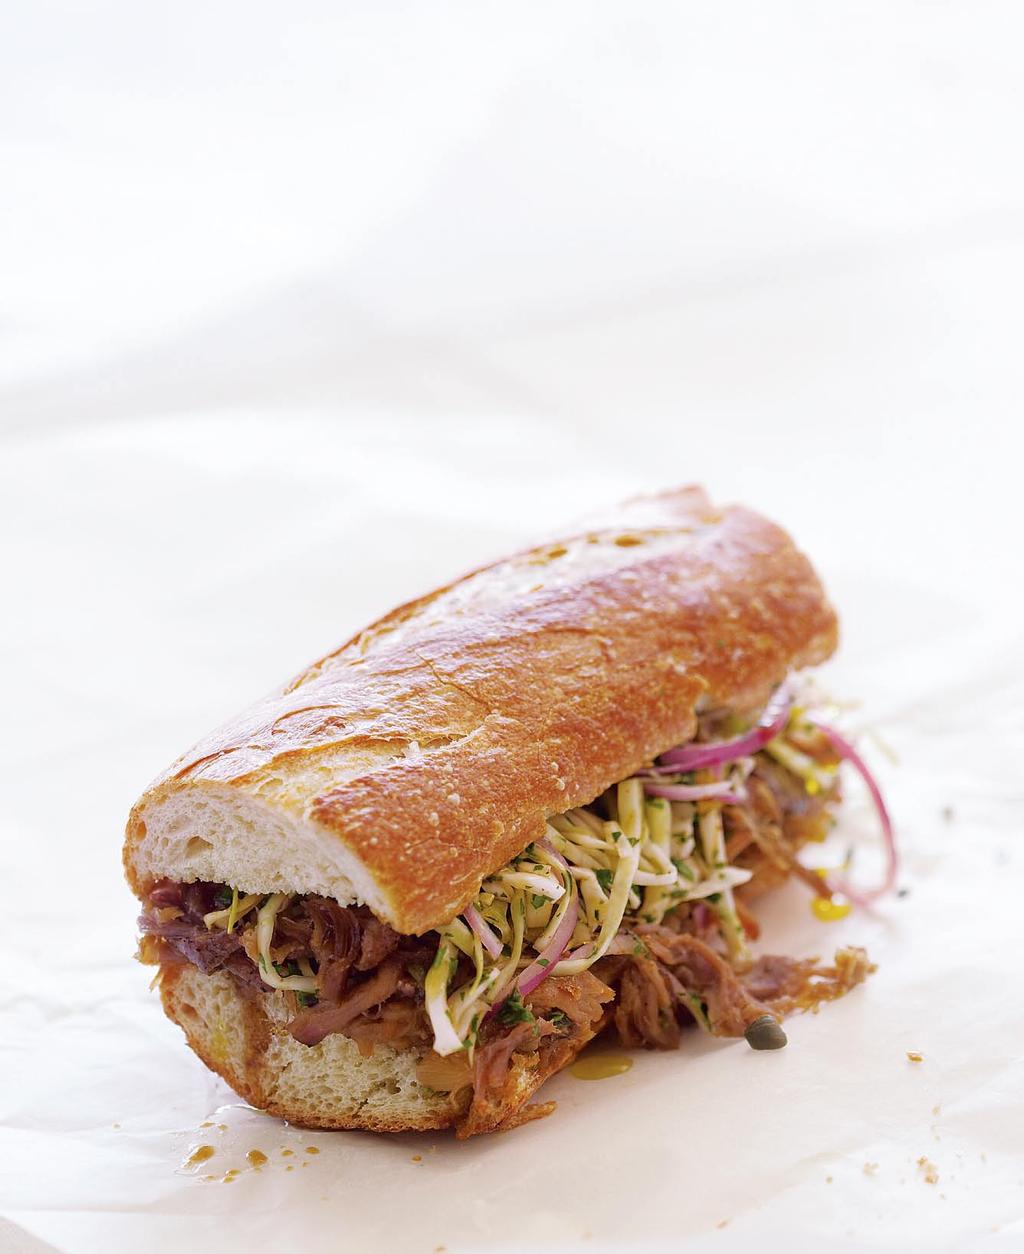 pulled-pork sandwiches with cabbage, caper, and herb slaw For these sandwiches, the bread should be very lightly toasted so that it s soft and warm but not dry.